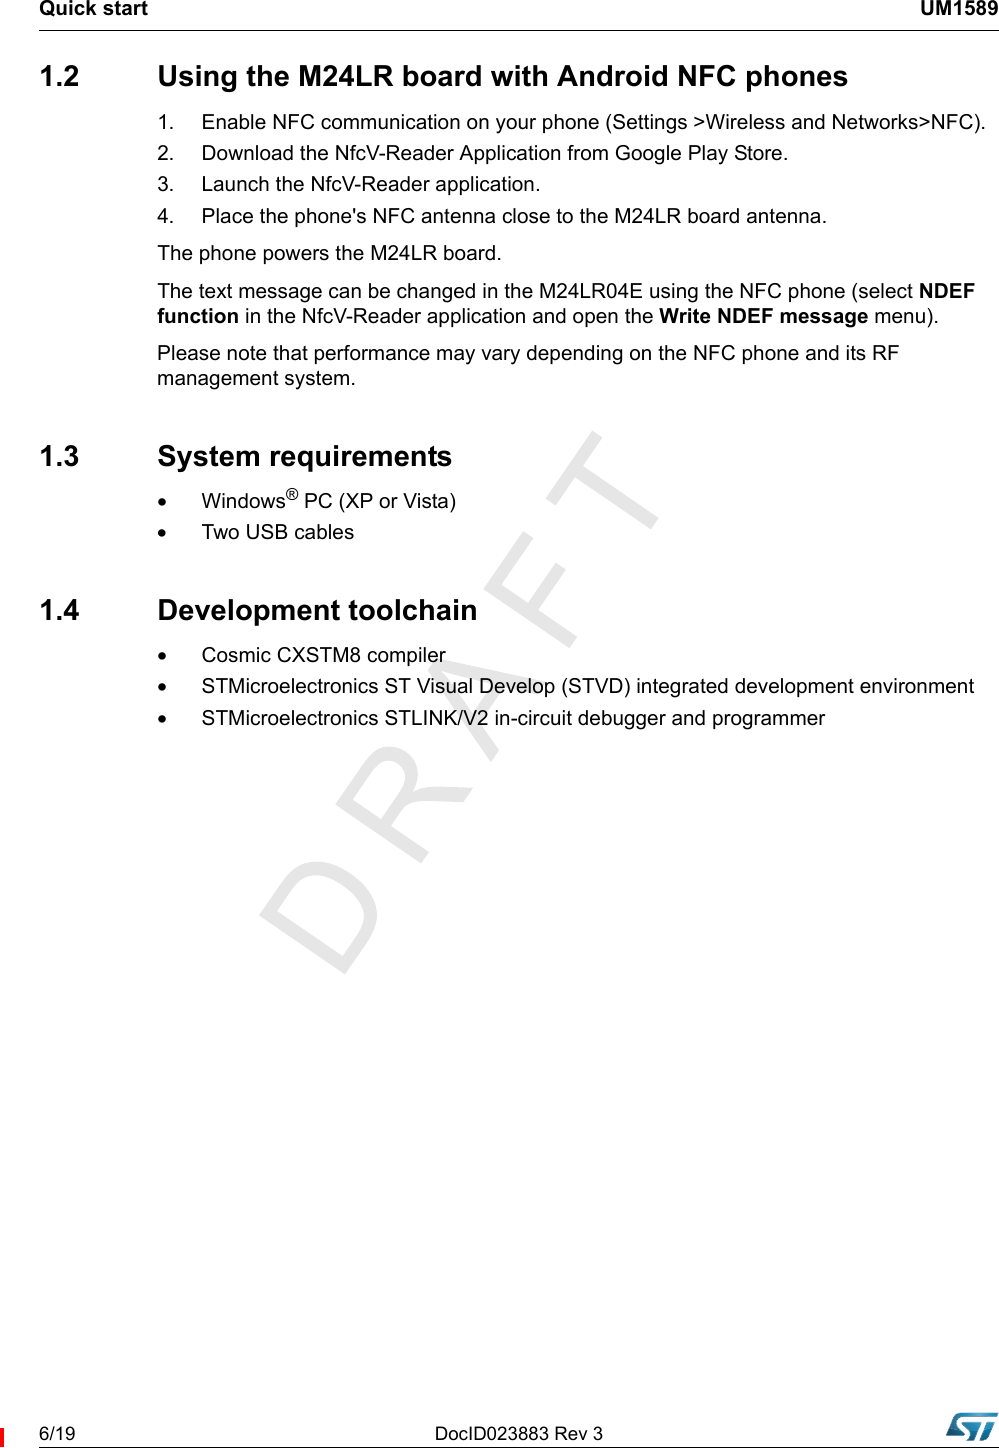 Quick start UM15896/19 DocID023883 Rev 31.2  Using the M24LR board with Android NFC phones1. Enable NFC communication on your phone (Settings &gt;Wireless and Networks&gt;NFC).2.  Download the NfcV-Reader Application from Google Play Store.3.  Launch the NfcV-Reader application.4.  Place the phone&apos;s NFC antenna close to the M24LR board antenna.The phone powers the M24LR board.The text message can be changed in the M24LR04E using the NFC phone (select NDEF function in the NfcV-Reader application and open the Write NDEF message menu).Please note that performance may vary depending on the NFC phone and its RF management system.1.3 System requirements•Windows® PC (XP or Vista)•Two USB cables1.4 Development toolchain•Cosmic CXSTM8 compiler•STMicroelectronics ST Visual Develop (STVD) integrated development environment •STMicroelectronics STLINK/V2 in-circuit debugger and programmer